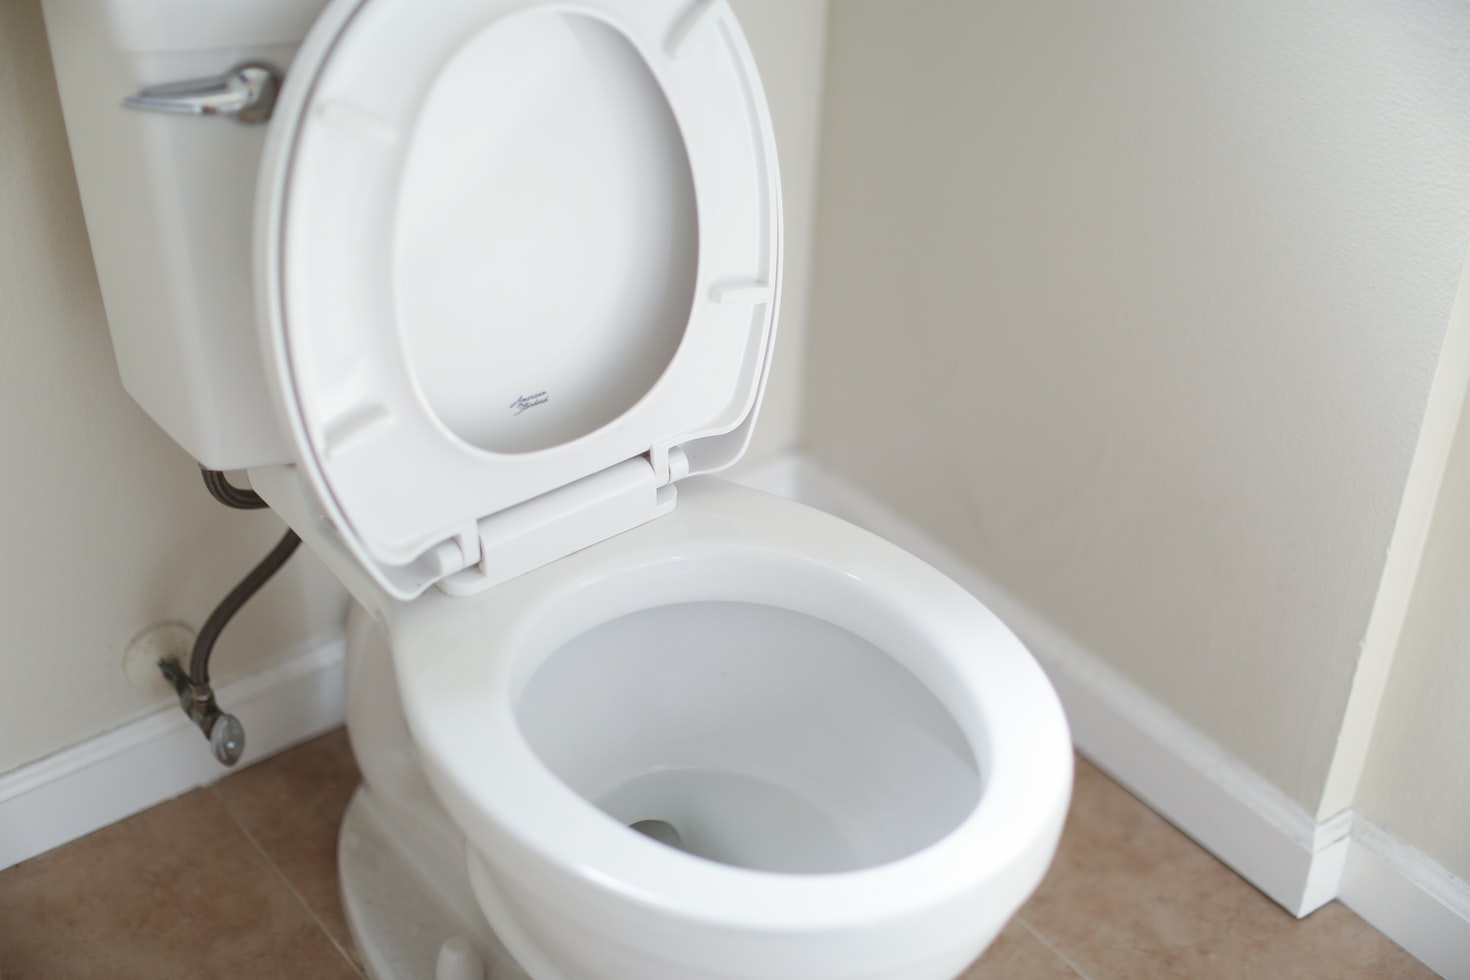 life lessons learned late  - “The toilet seat should be down to make pooping more comfortable. My whole life, I just thought it was for people who were too small to sit on the full rim of the toilet, so that’s why I never used it . . .  but hey. At least